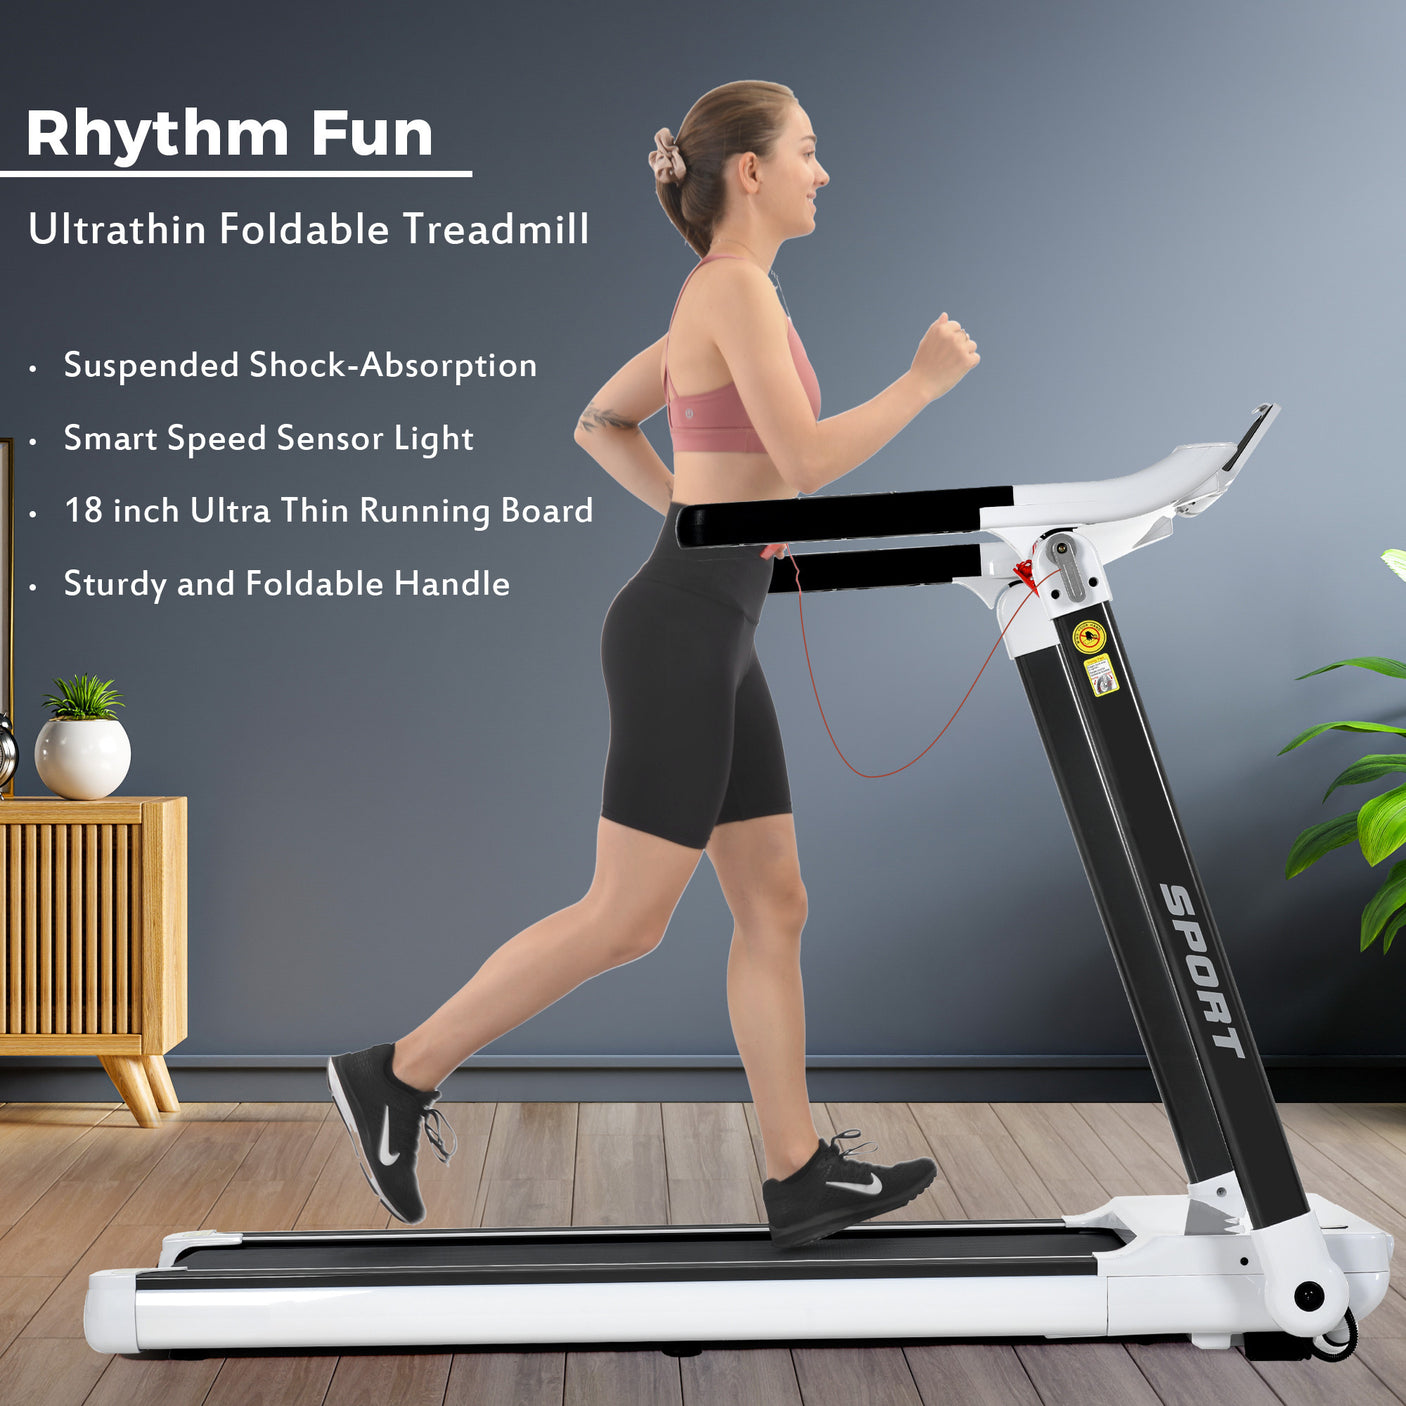 Portable Compact Treadmill;Electric Motorized  3.5HP;14KM/H;Medium Running Machine Motorised Gym 330lbs;Foldable for Home Gym Fitness Workout Jogging Walking;Bluetooth Speaker  APP FITIME